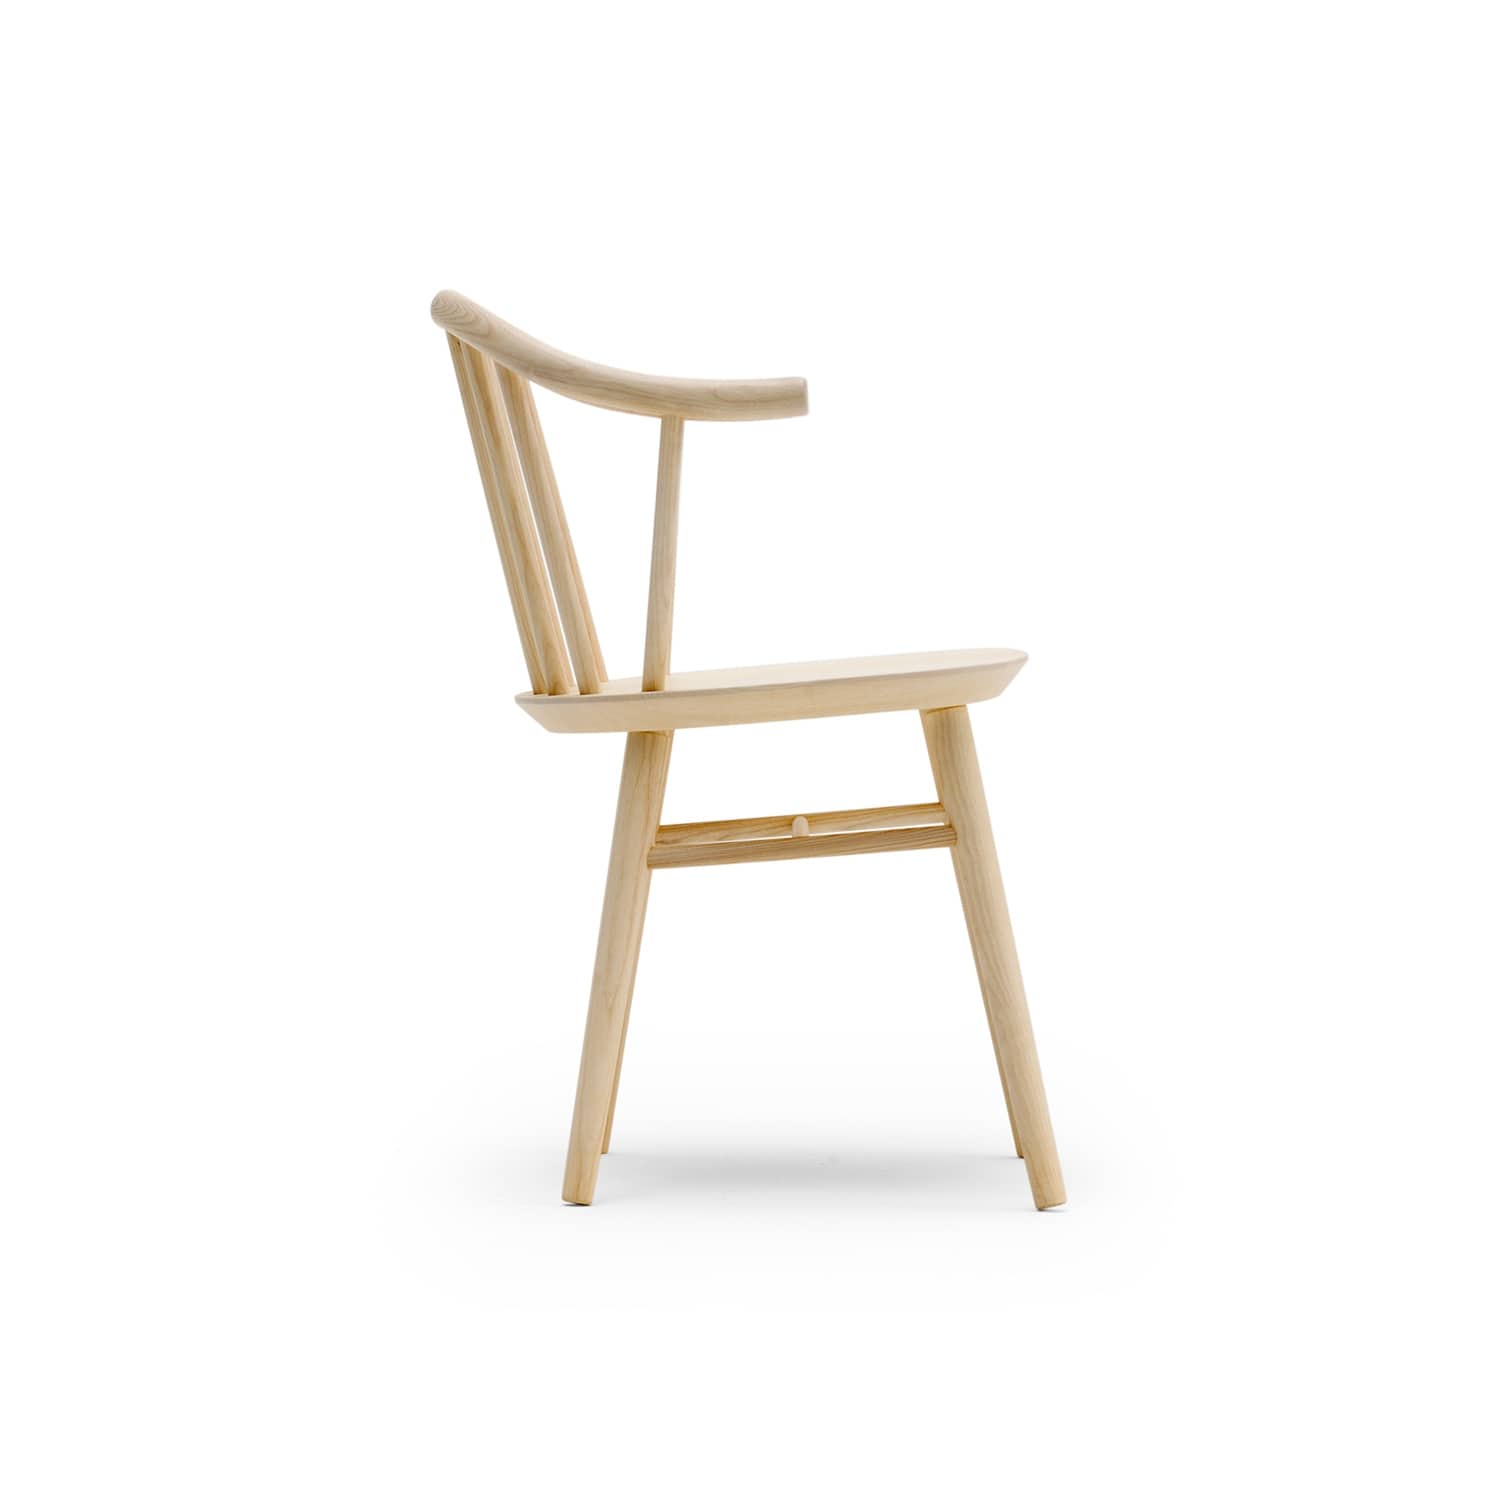 IDEE SHOP Online ONDA CHAIR Natural by Fantastico: チェア